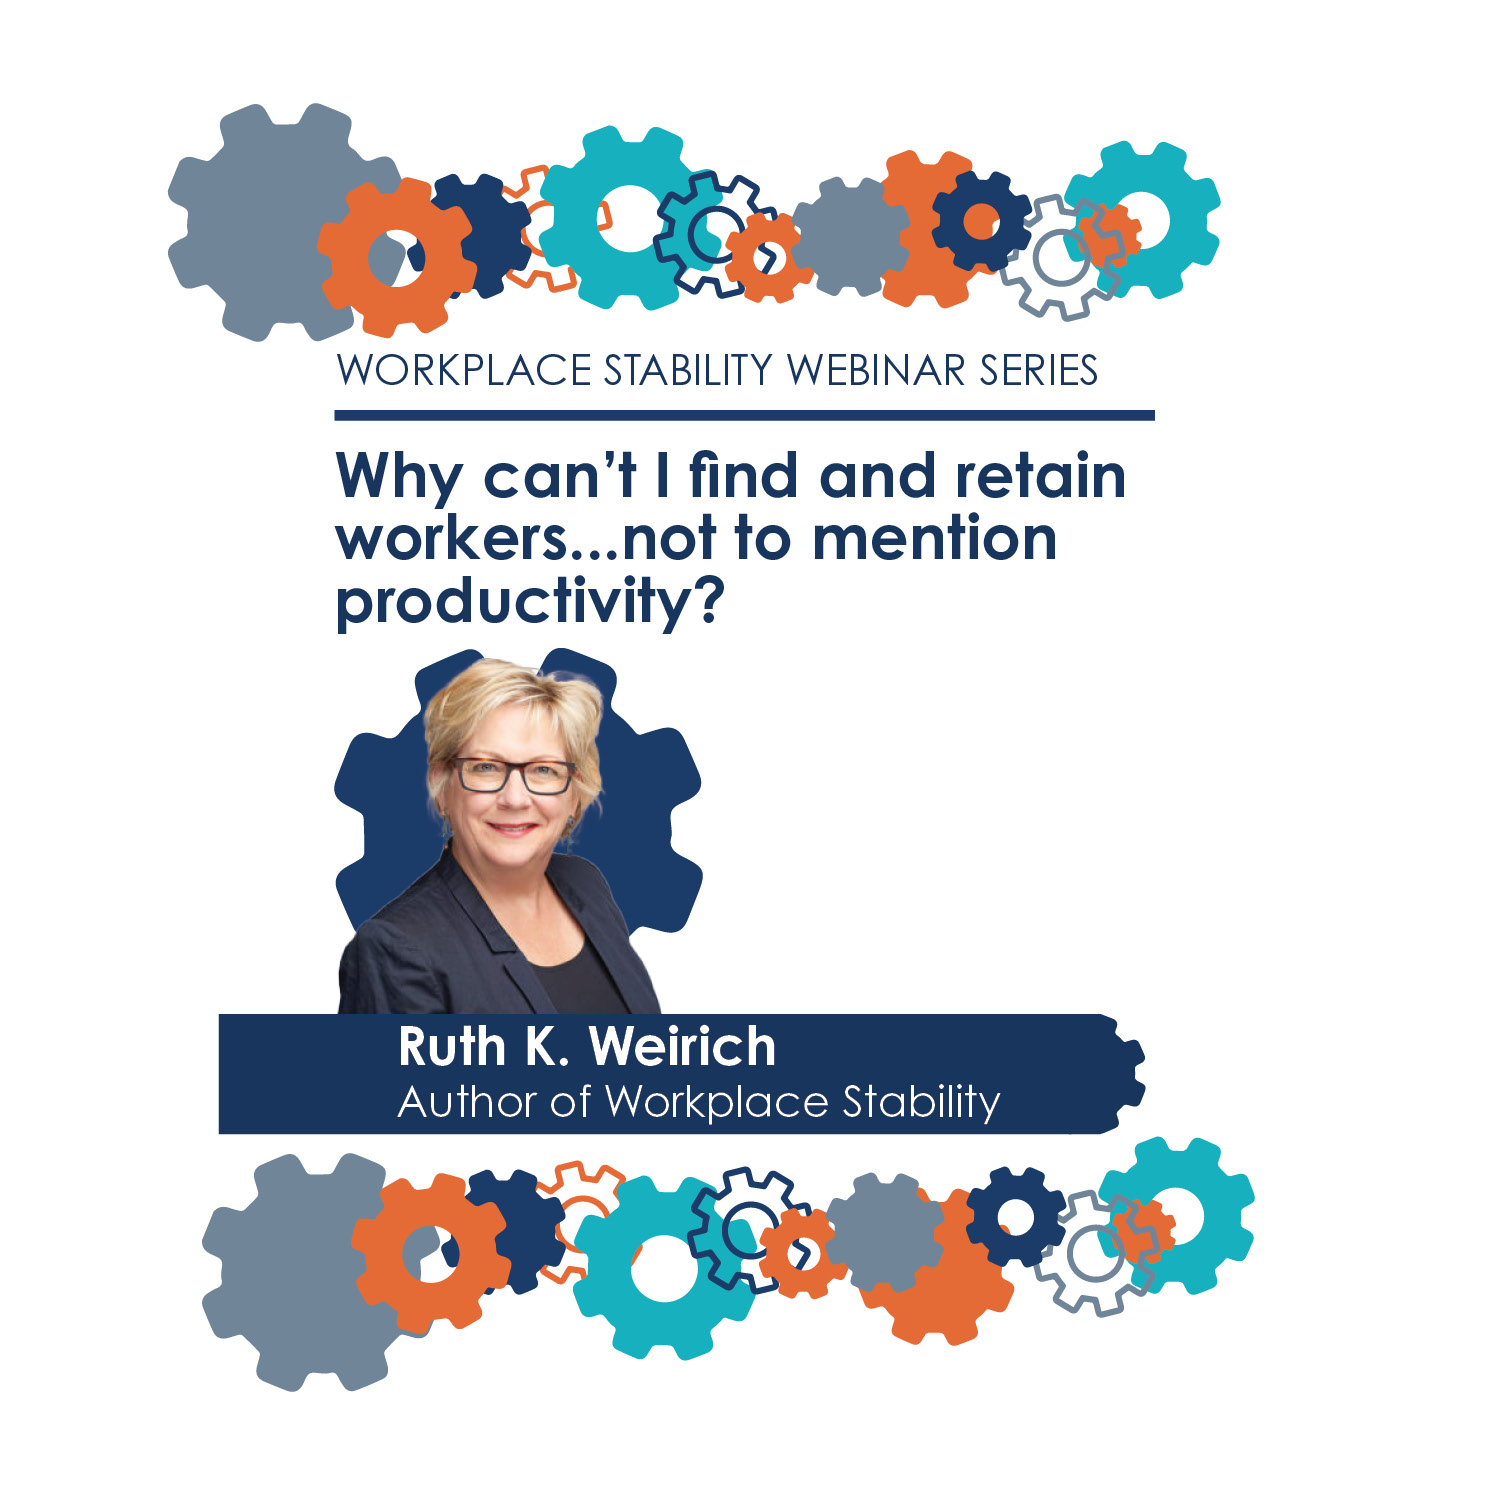 Workplace Stability Webinar 2: Why can’t I find and retain workers…not to mention productivity?